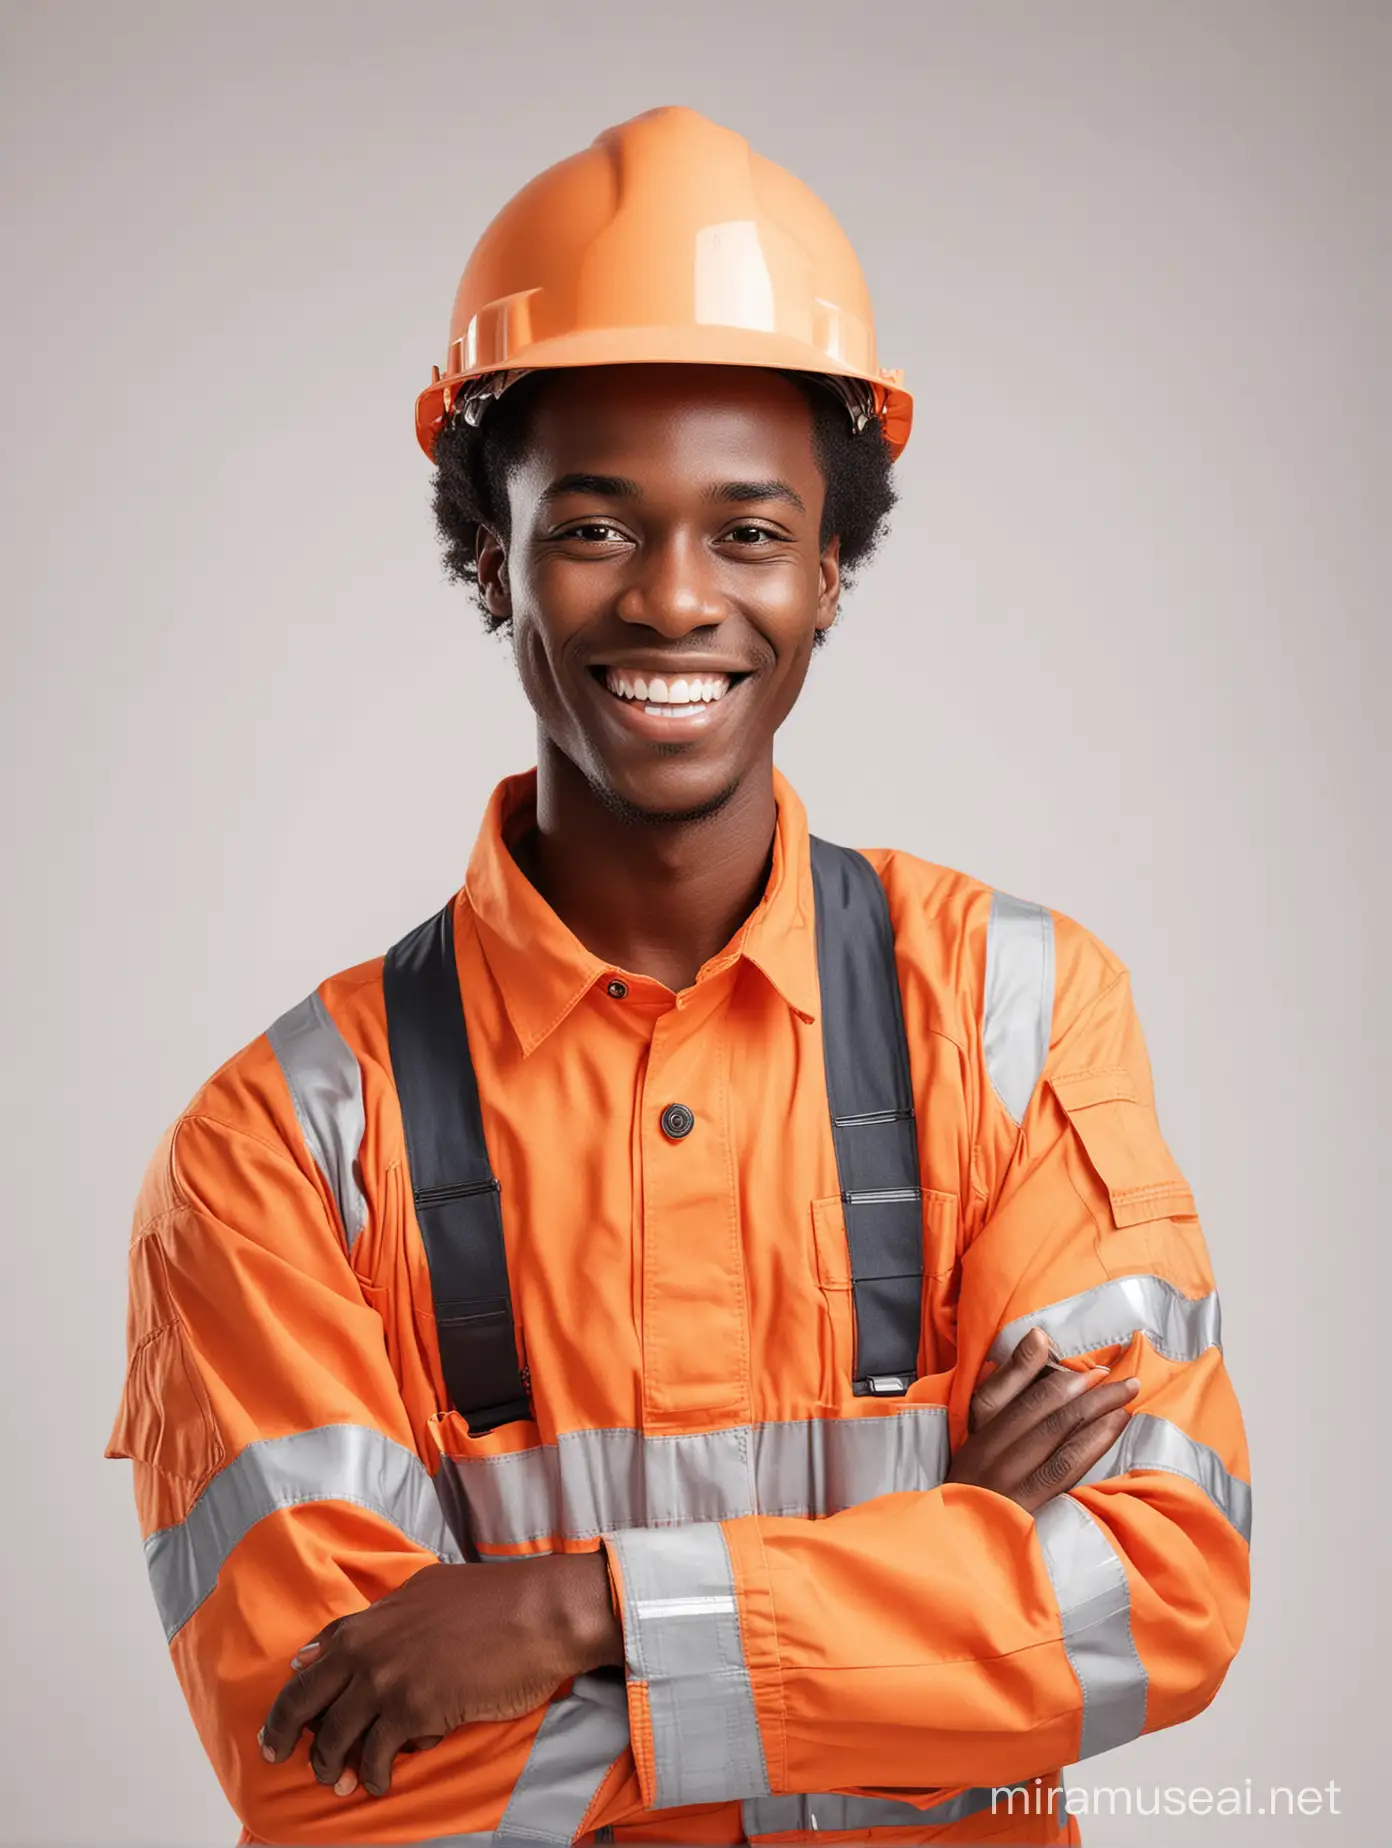 Smiling African Field Agent in Orange Repair Outfit on White Background